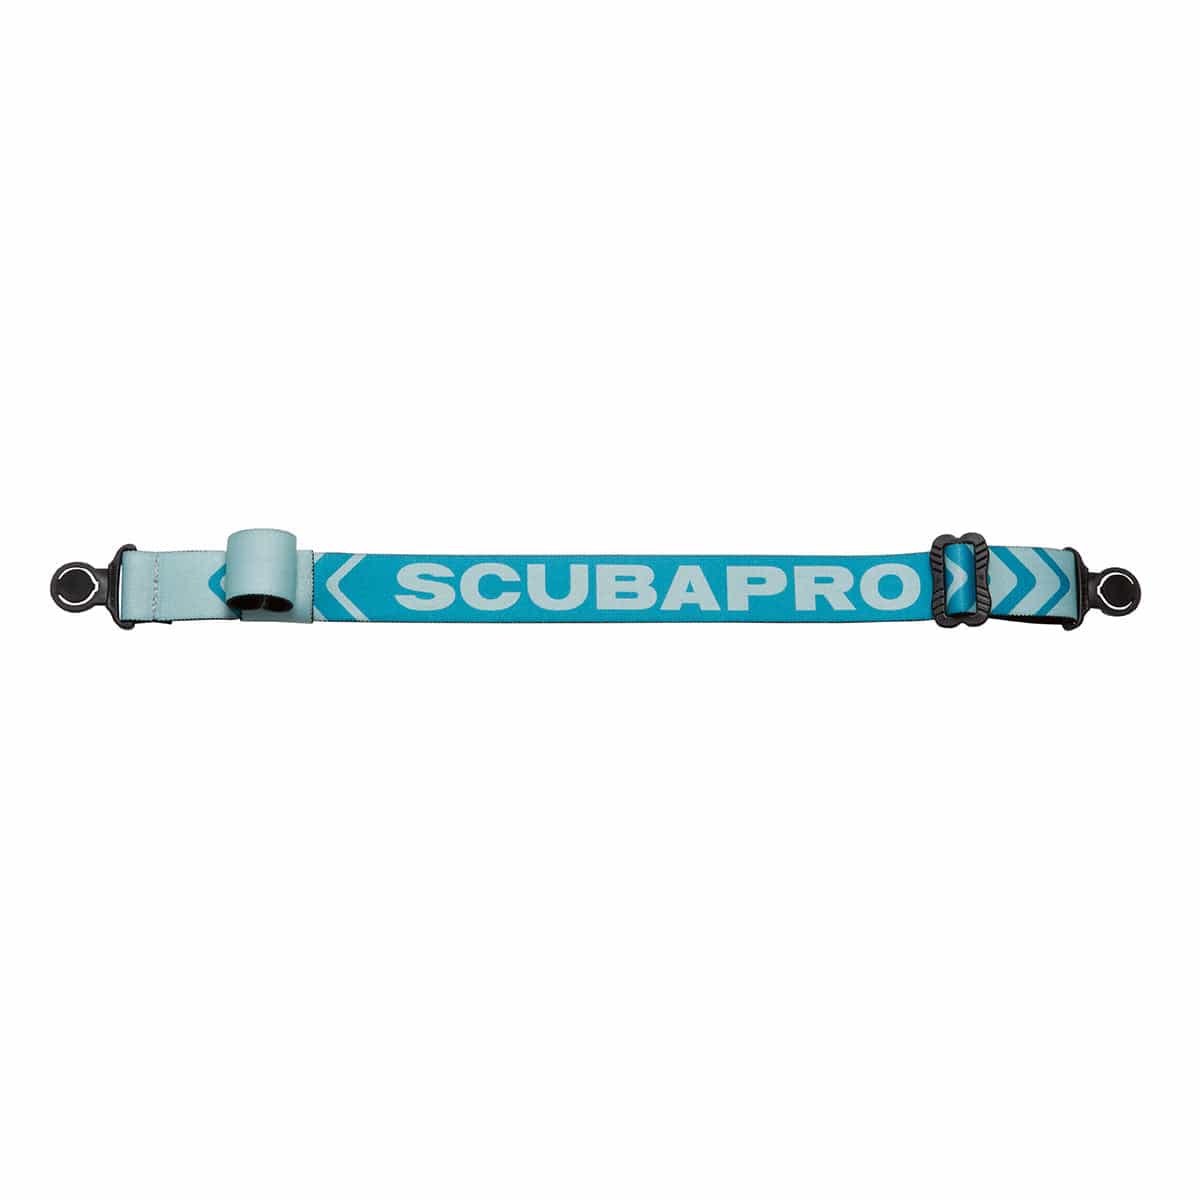 Scubapro Comfort Strap - Turquoise - 24.730.020-NED - 29